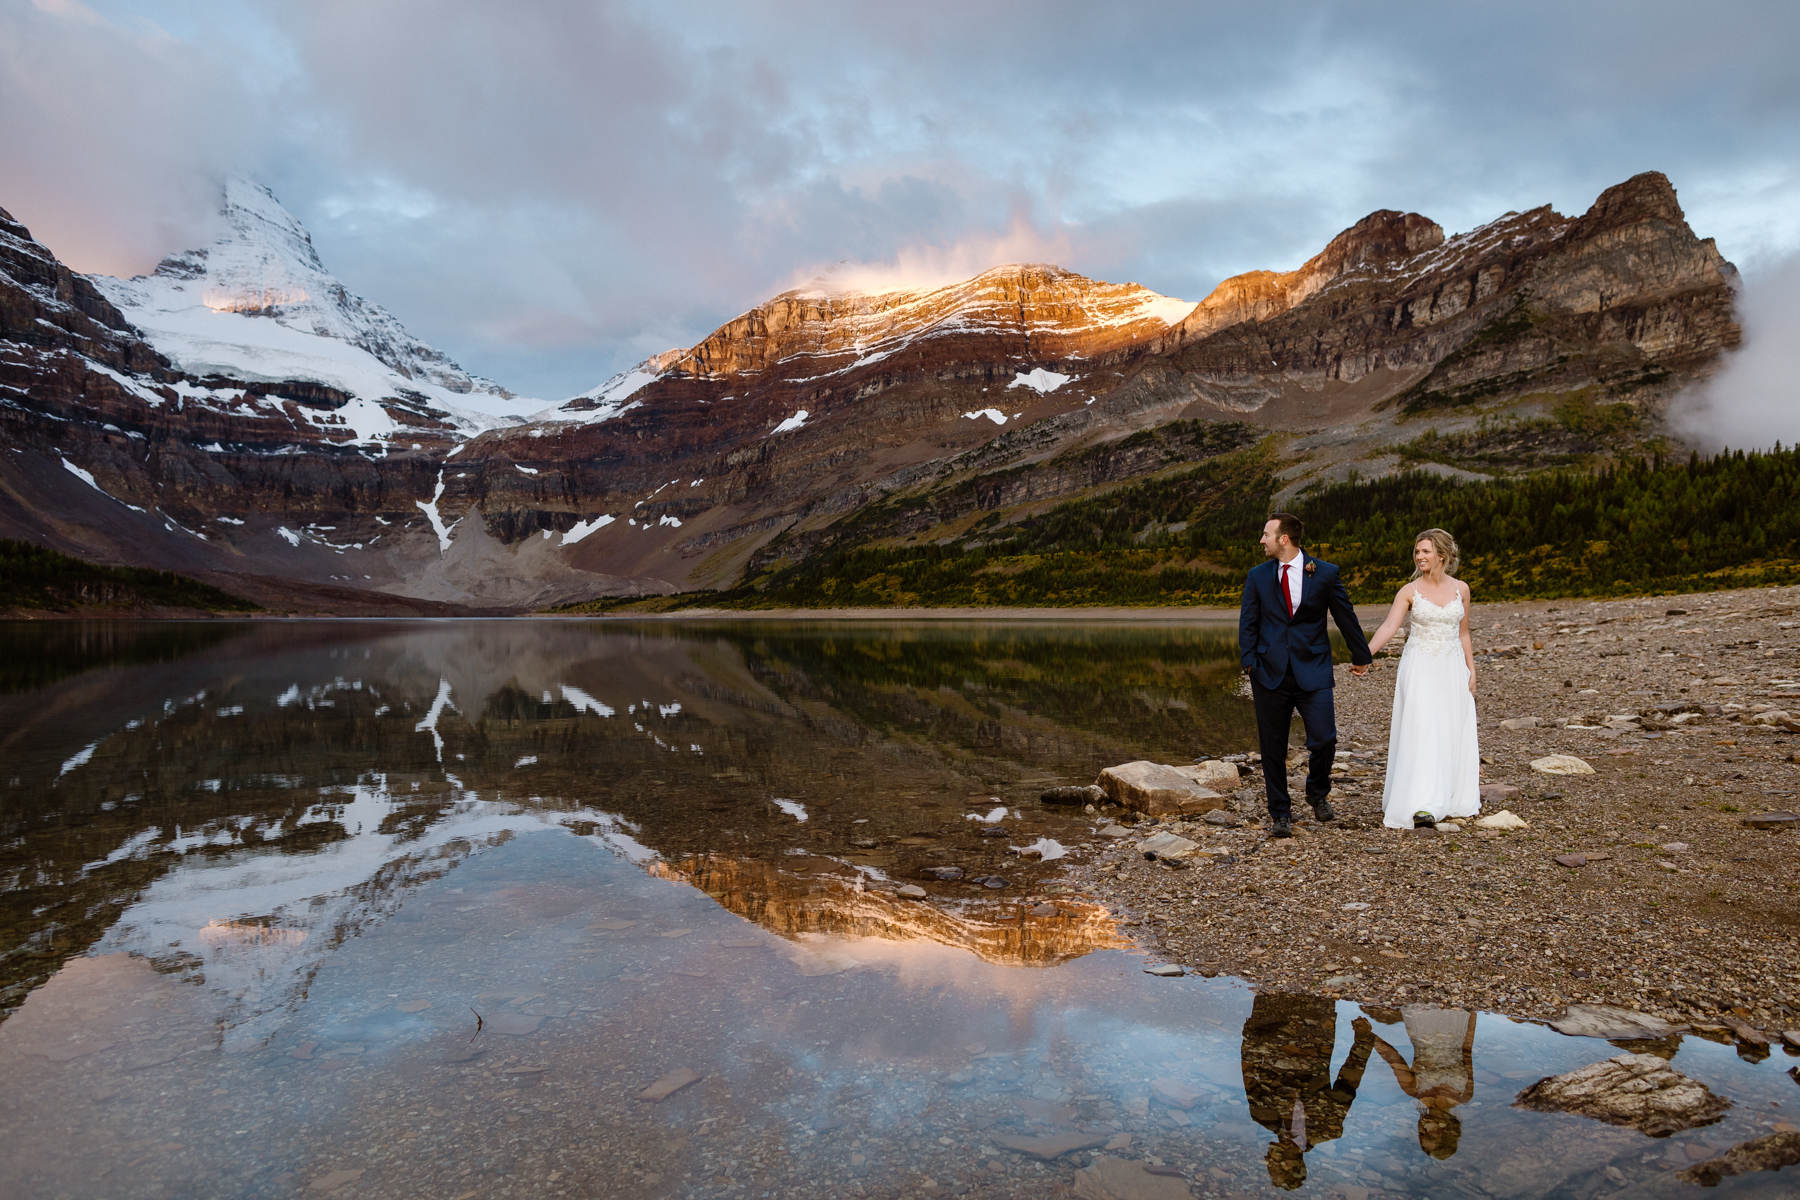 Mount Assiniboine Elopement Photographers at a Backcountry Lodge - Photo 49